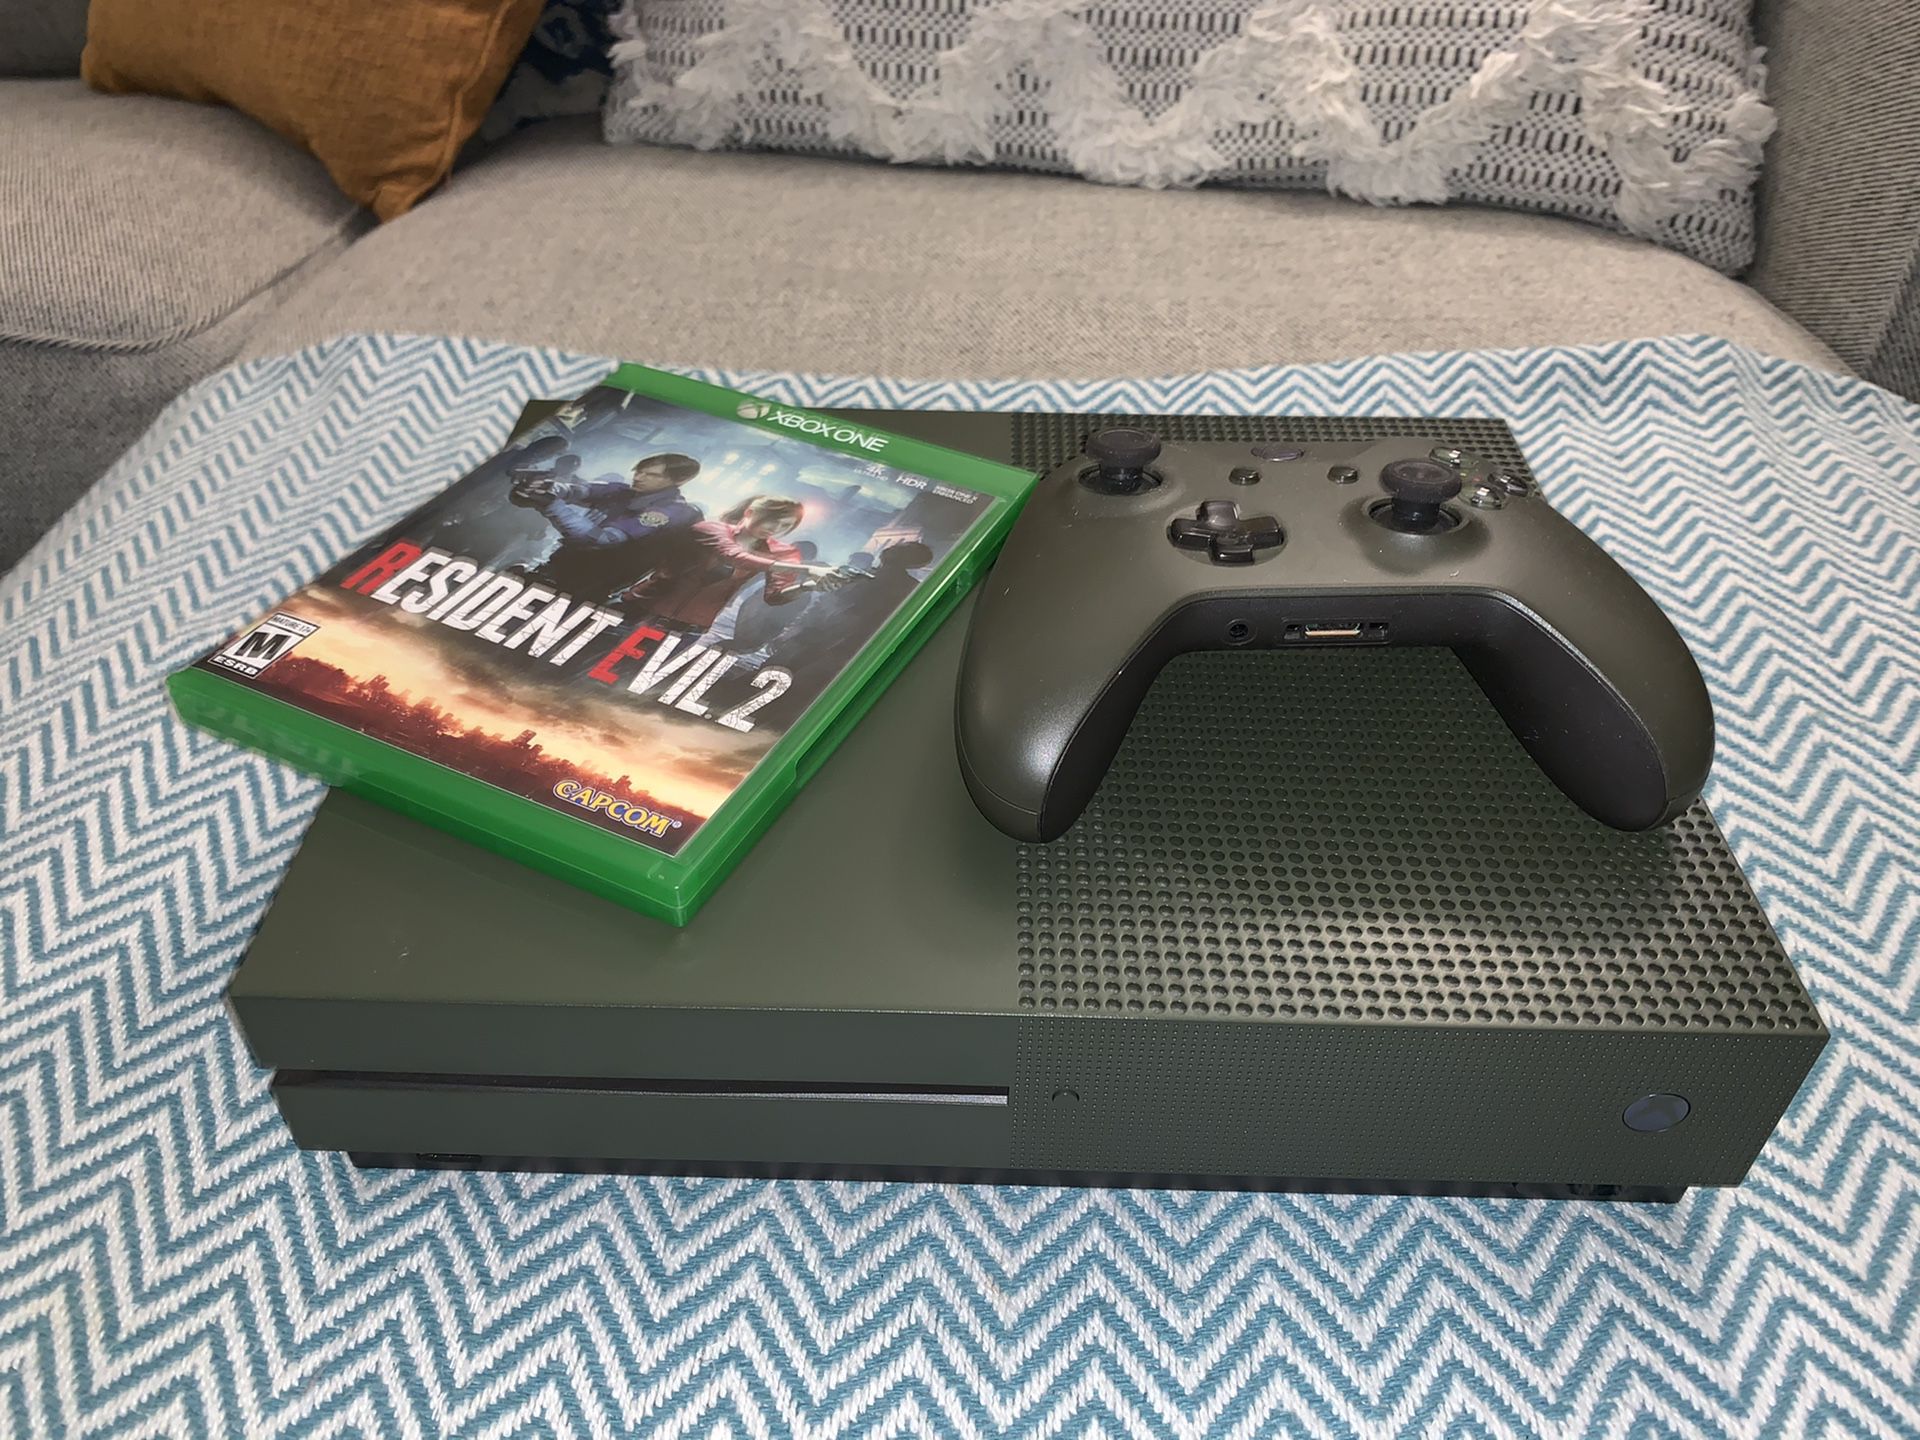 Microsoft Xbox One S Military Green Special Edition Console - 1TB Bundle. Including console, one wireless controllers , hdmi cable, and Resident Evil